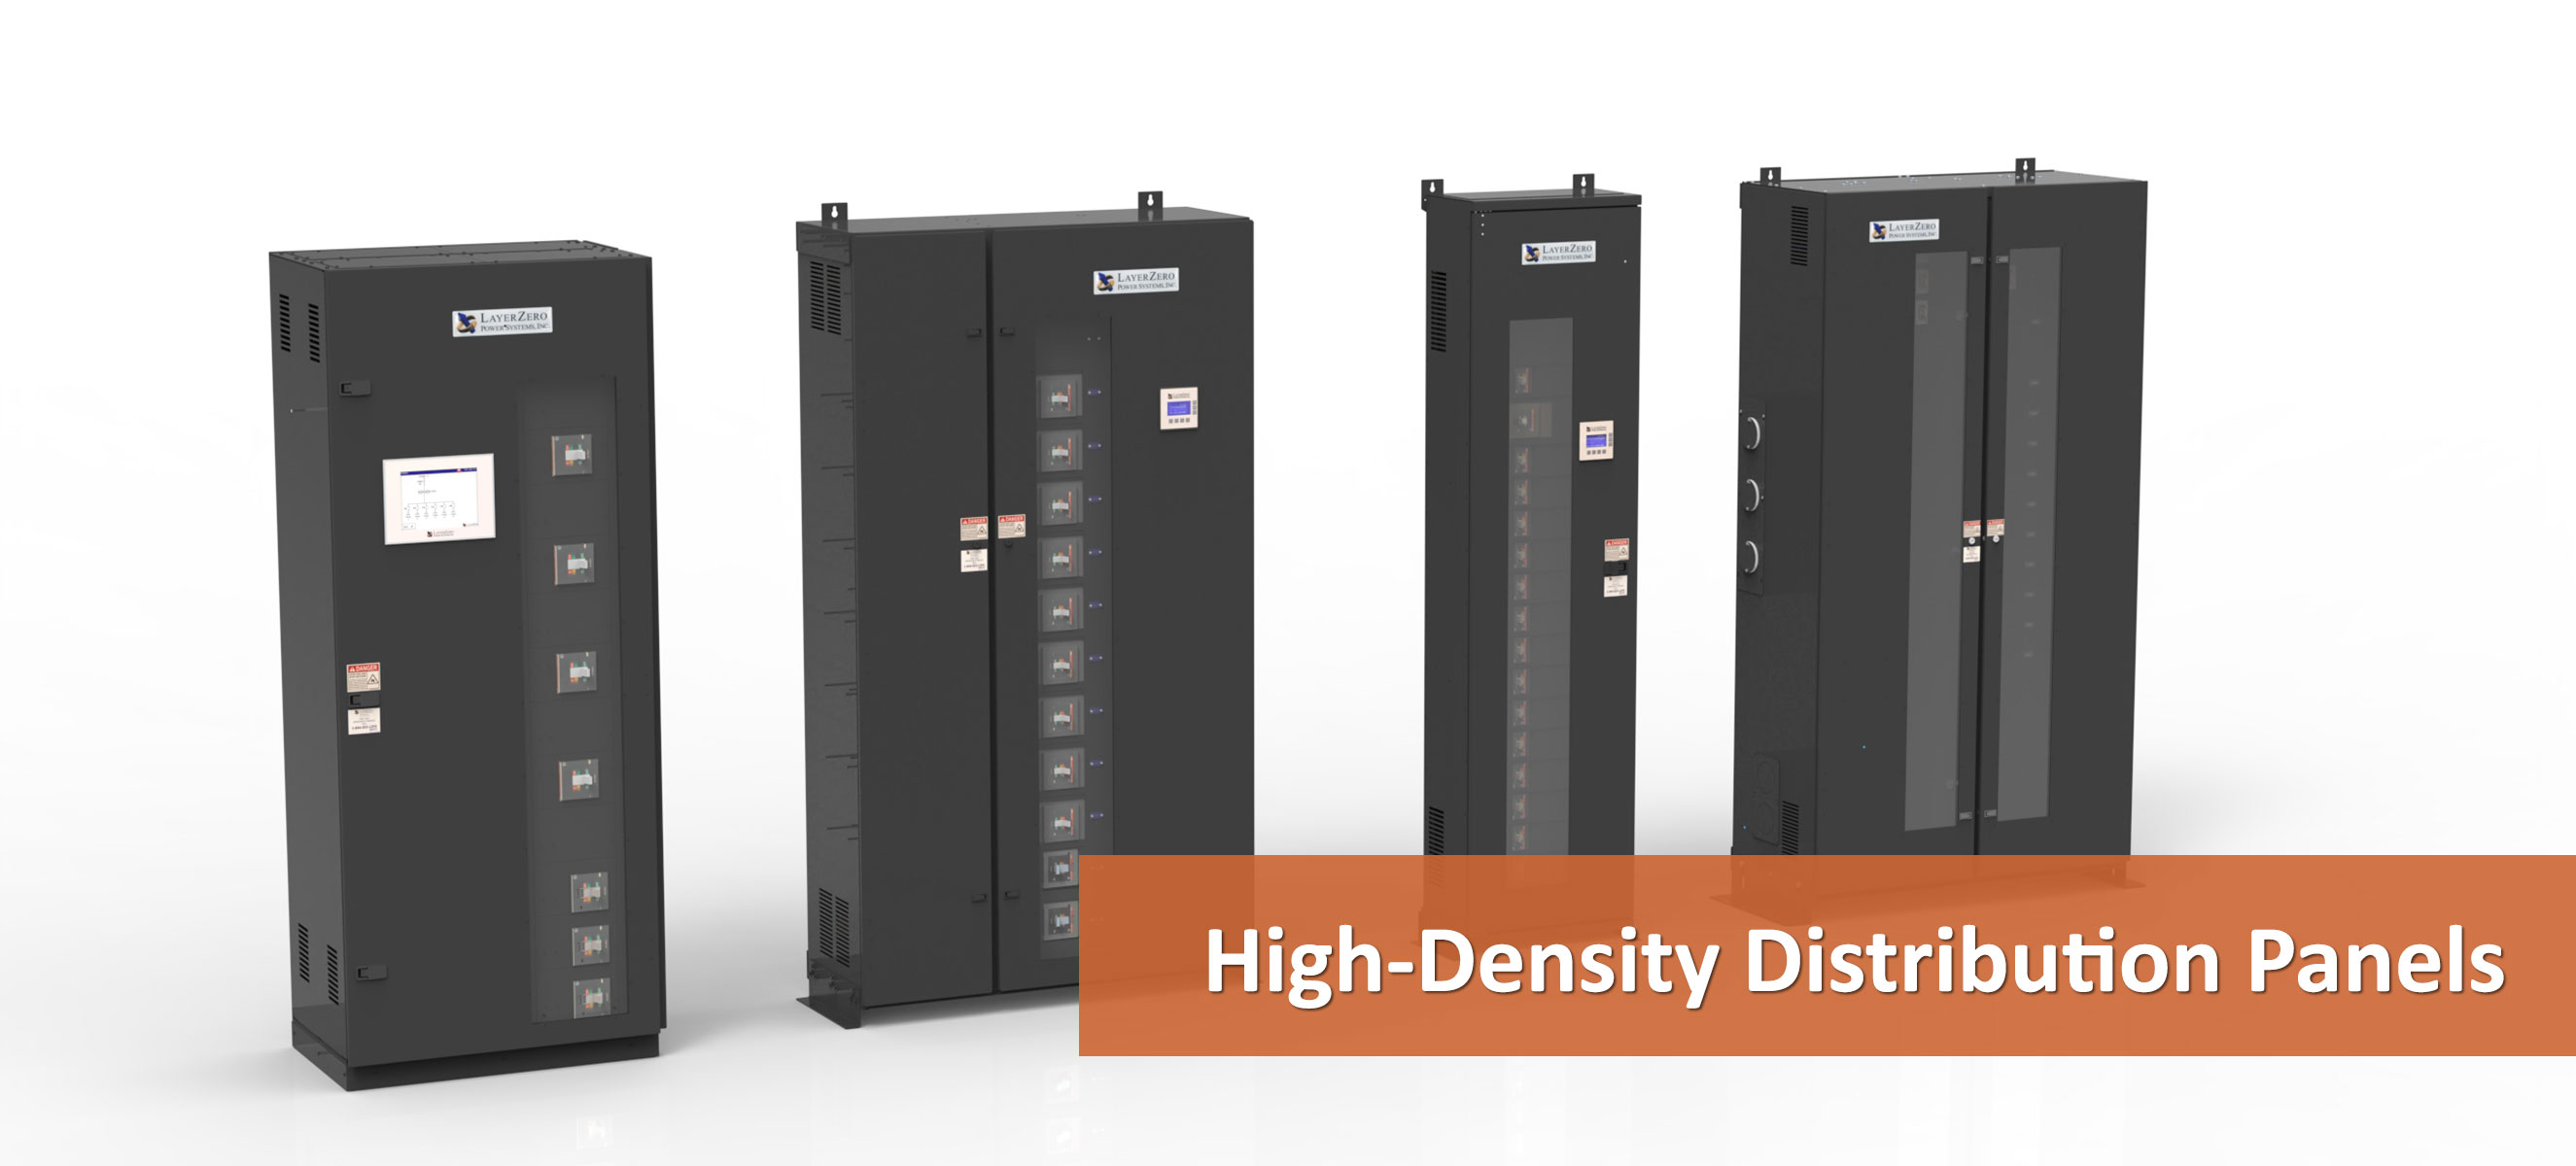 All LayerZero High Density Power Panel products